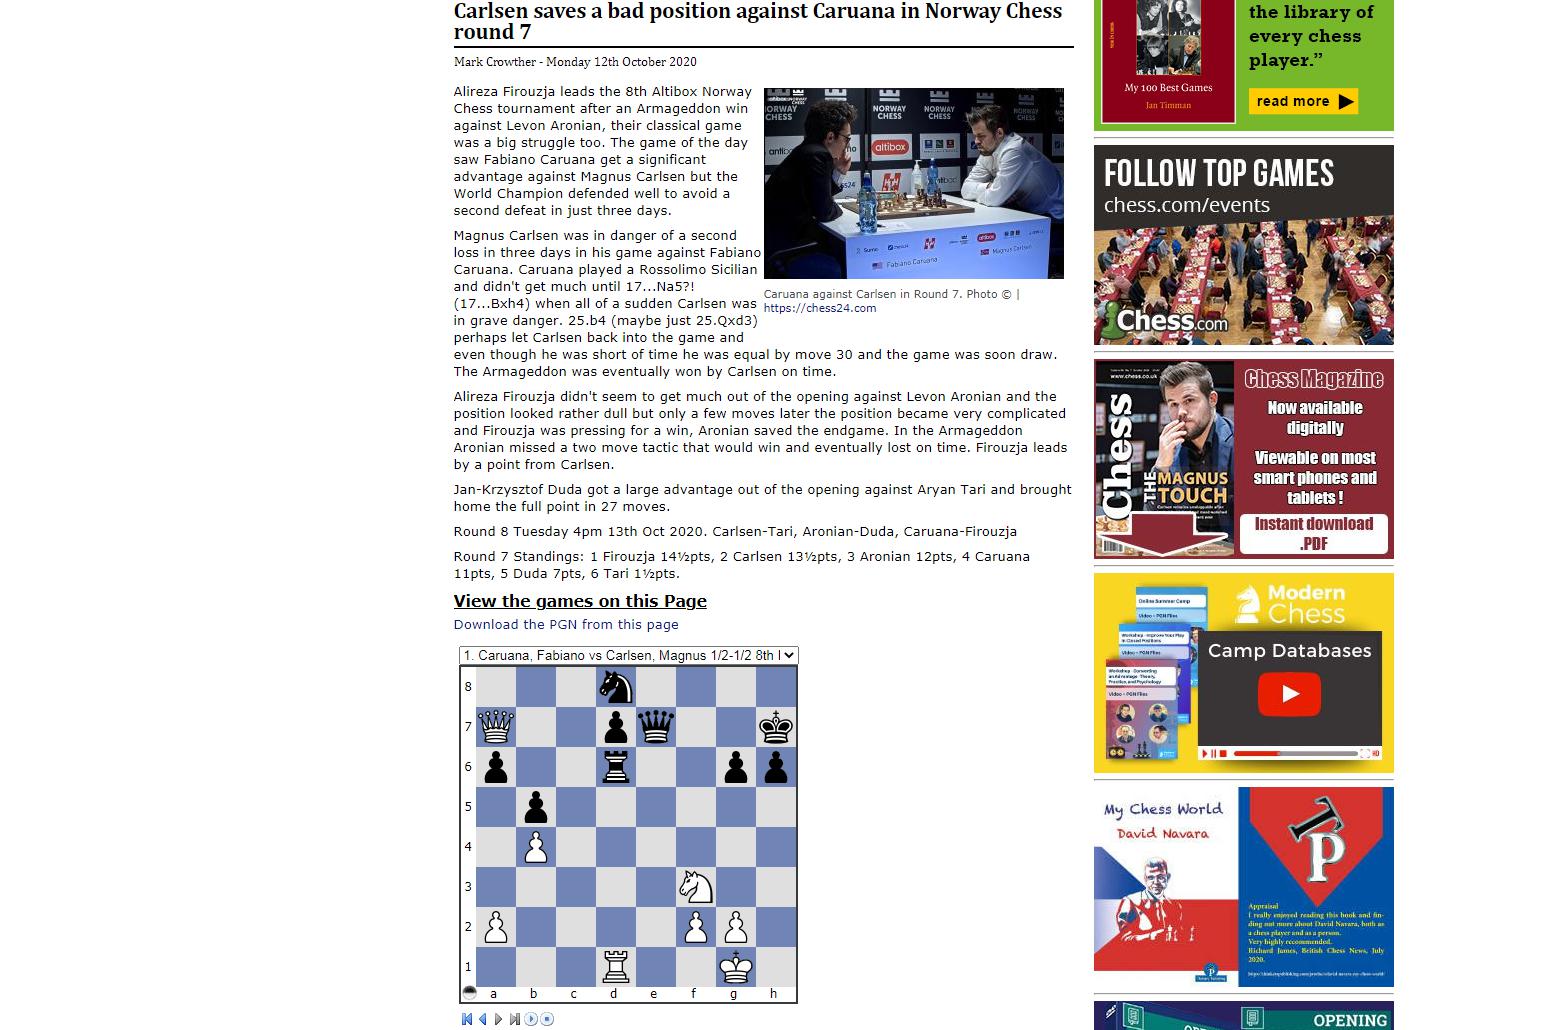 Photo of Carlsen saves a bad position against <b>Caruana</b> in Norway Chess round 7